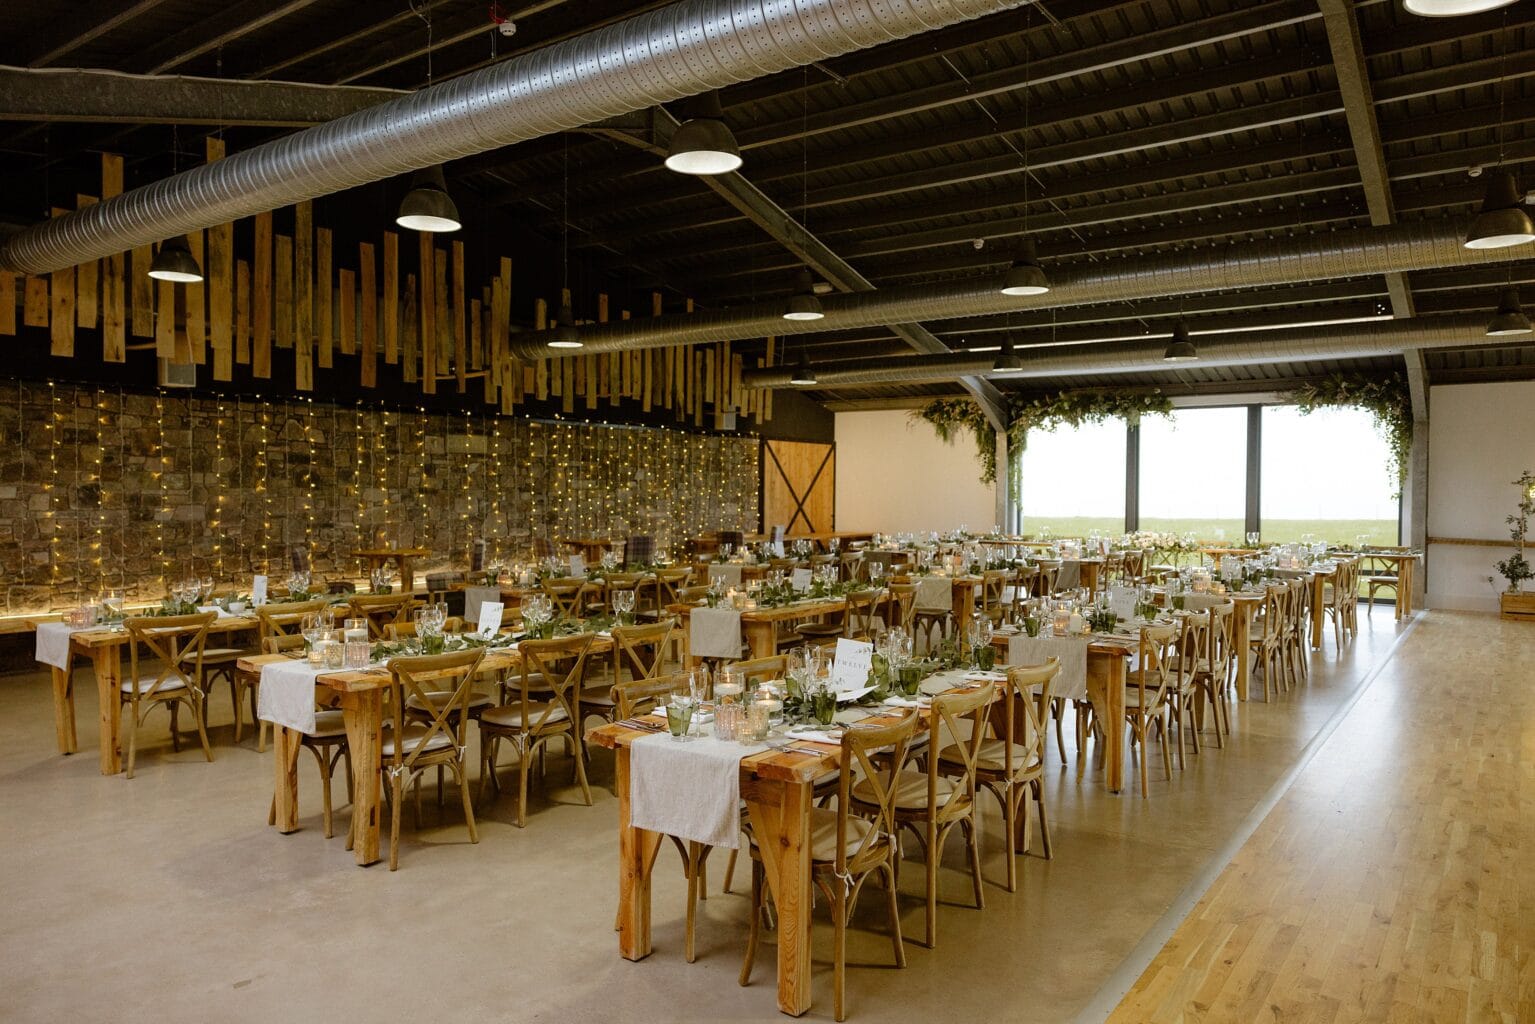 rows of tables set for dinner with glassware candles and greenery at barn wedding venues west lothian a large window wooden paneling and stings of fairy lights are visible in the background